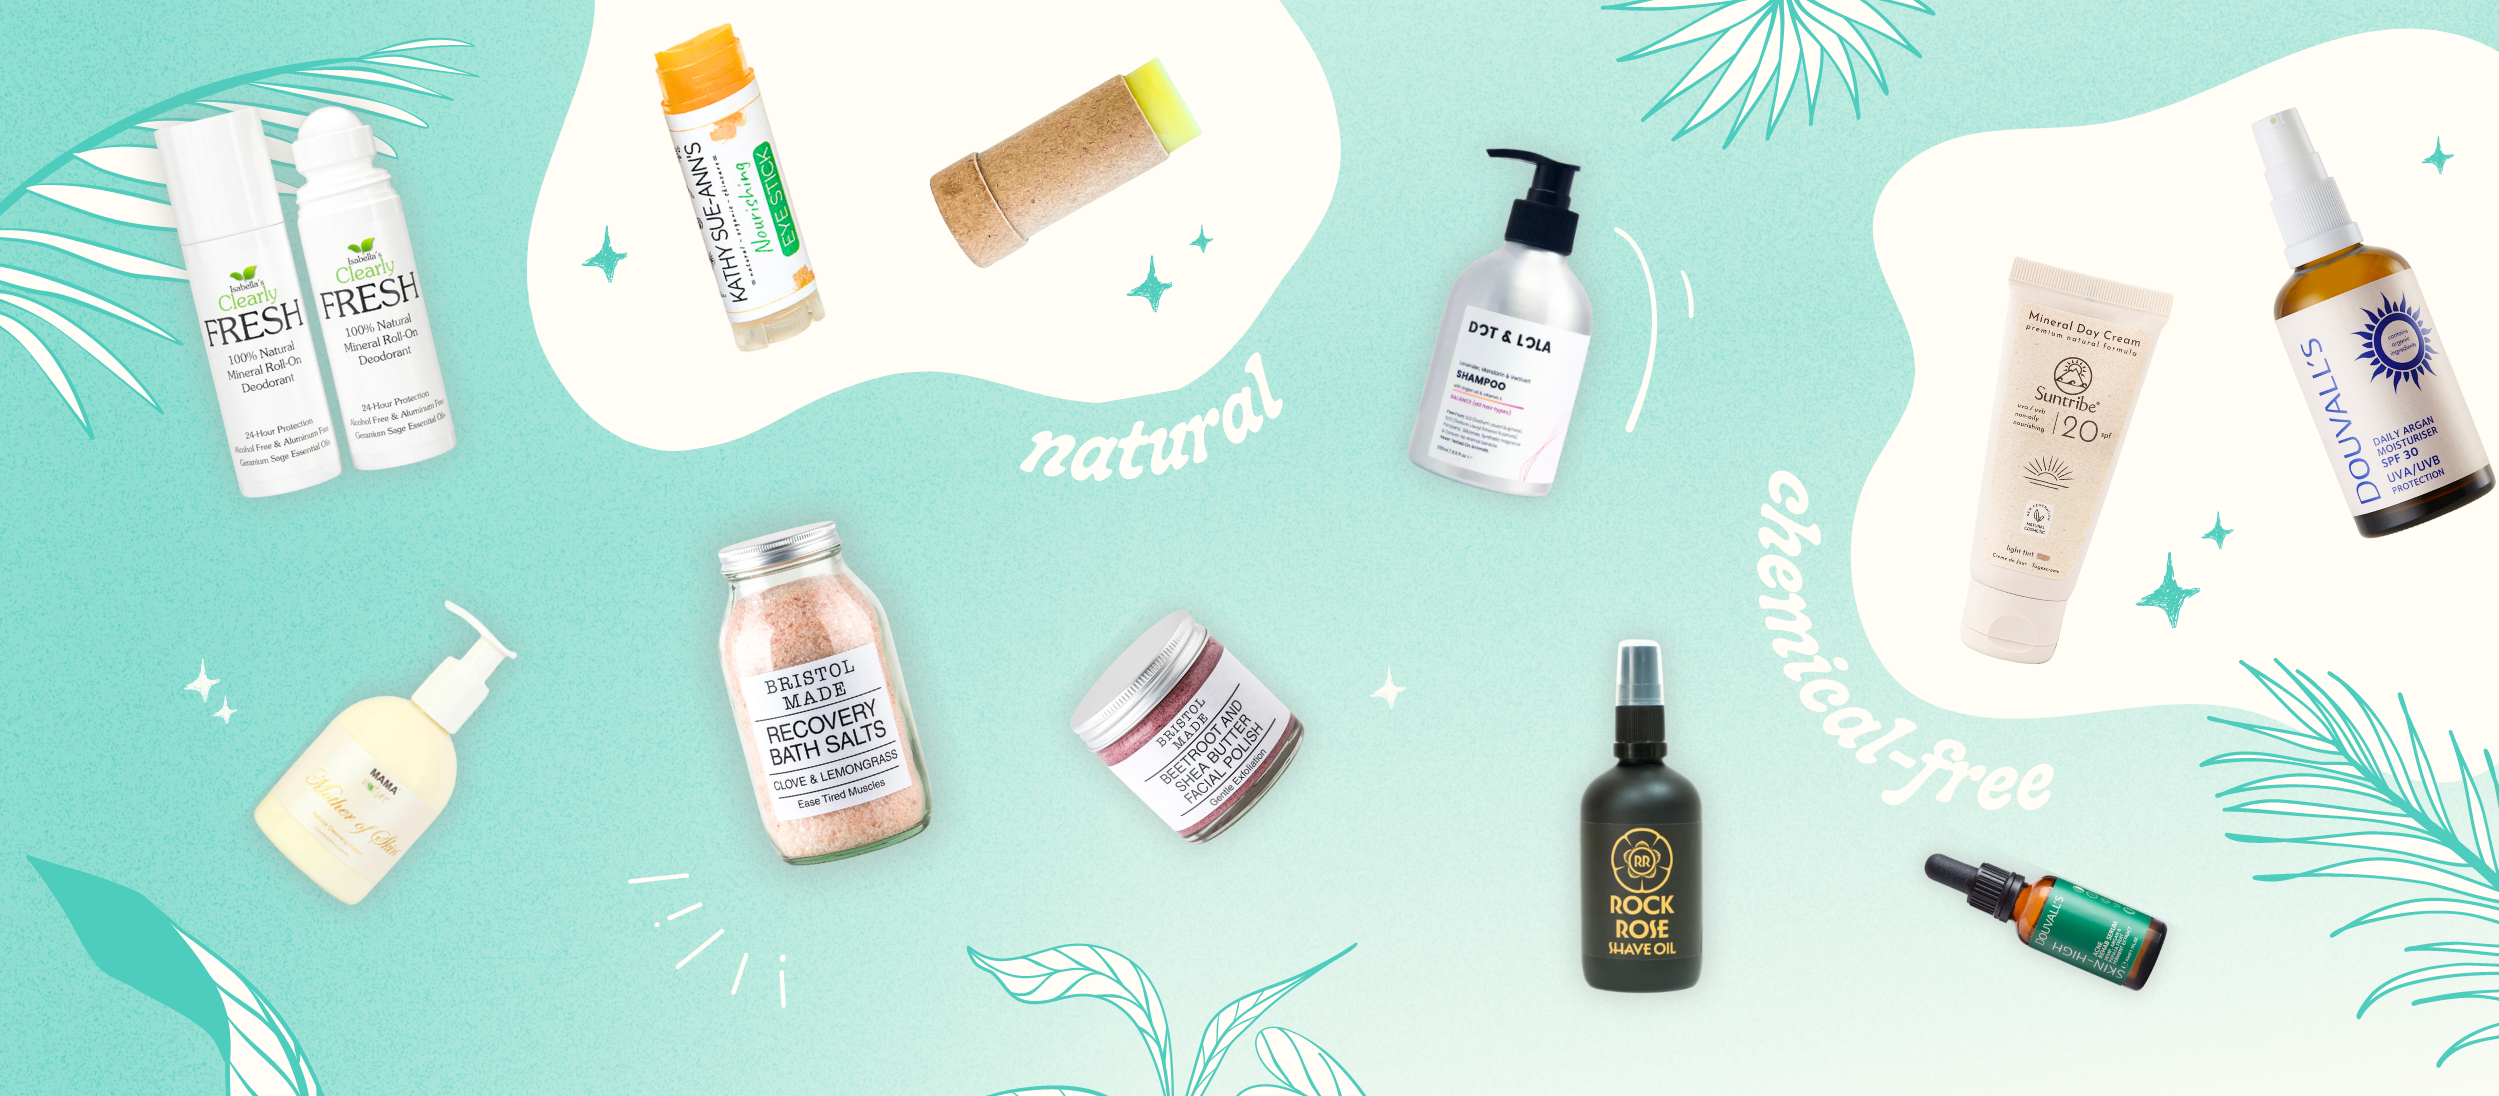 A cluster of natural and organic skincare products on a minty background with cartoon graphics of plants around.